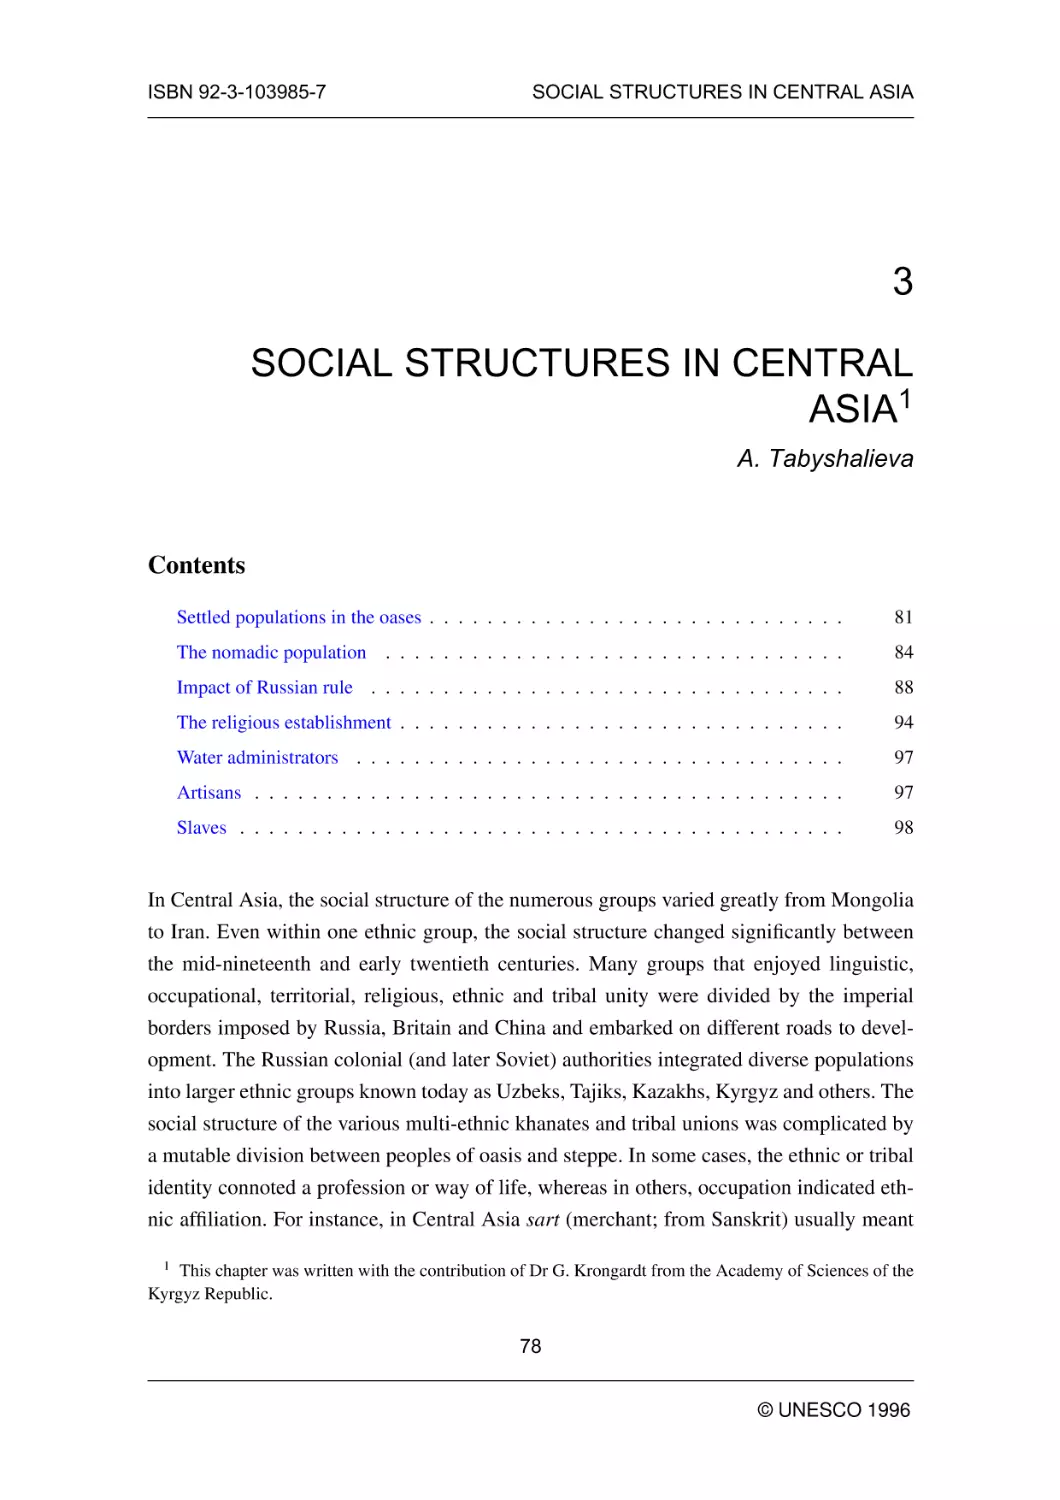 SOCIAL STRUCTURES IN CENTRAL ASIA